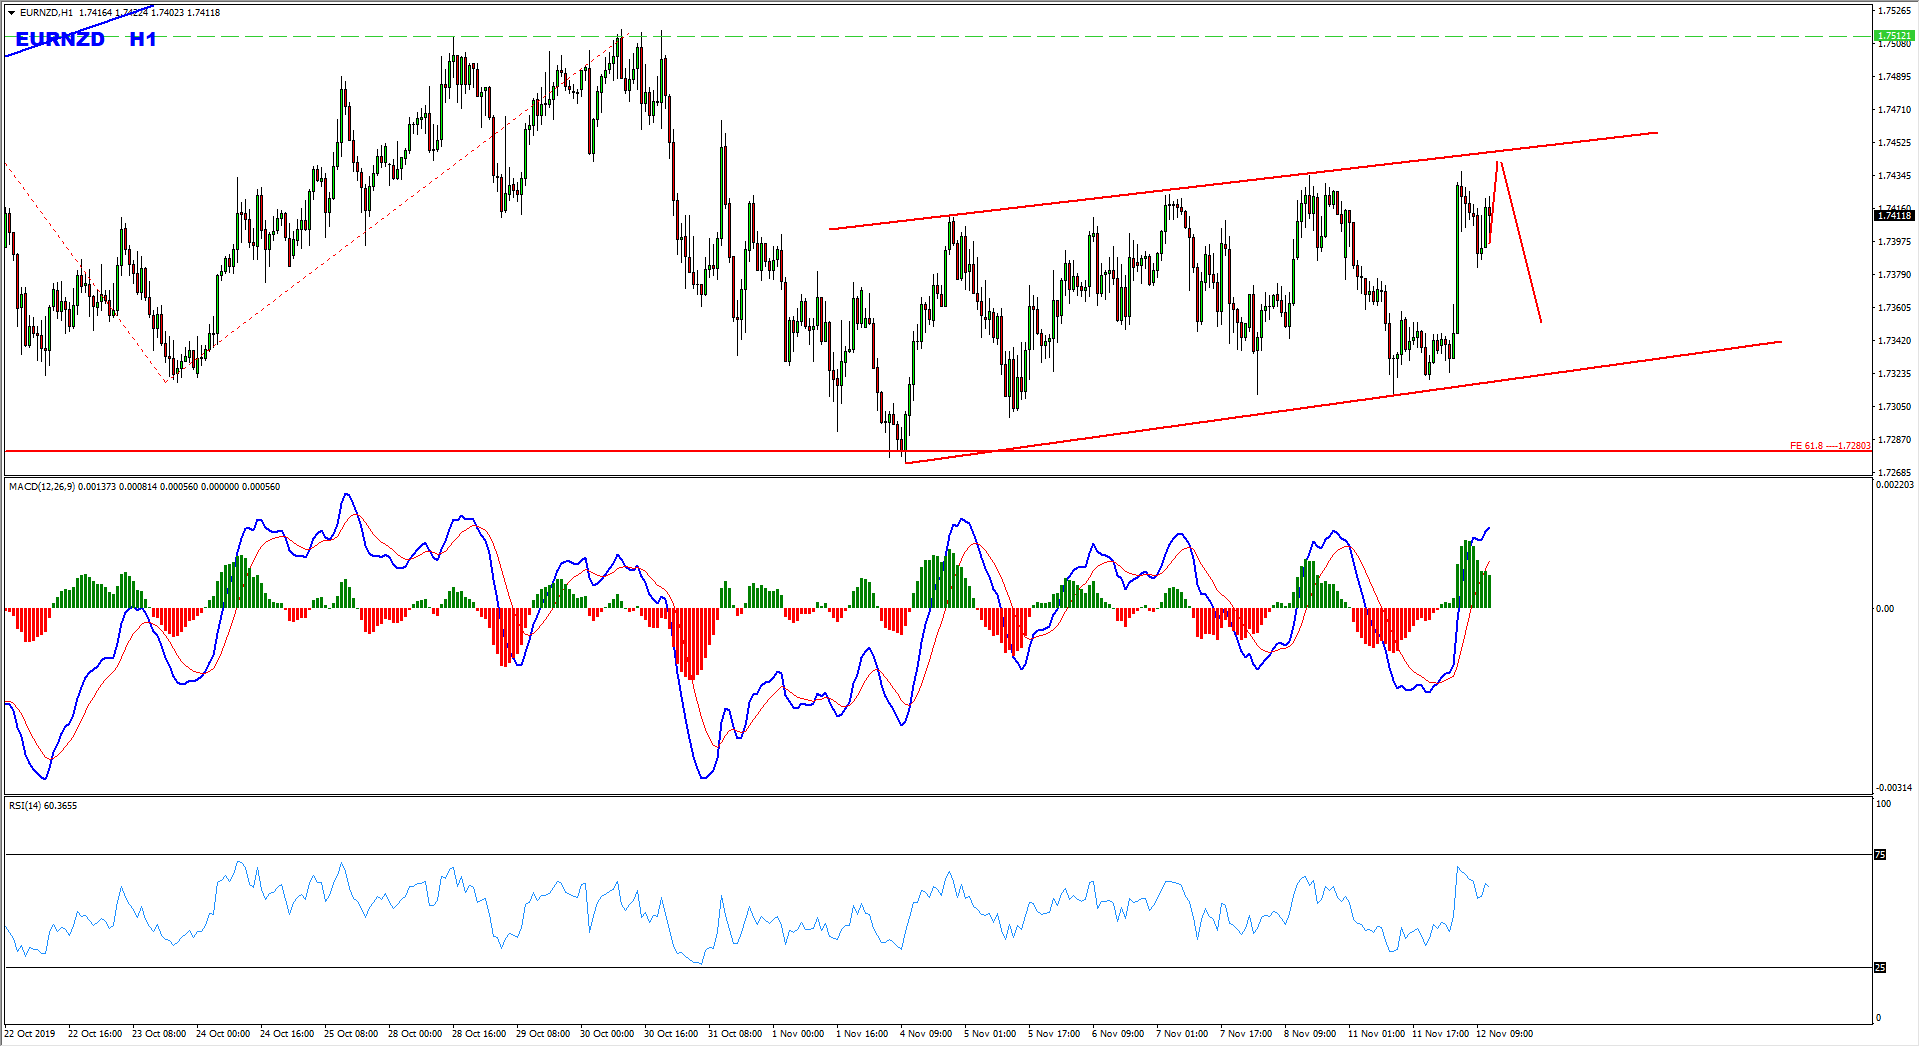 EURNZD Sell Trade Opportunity Inside A Range